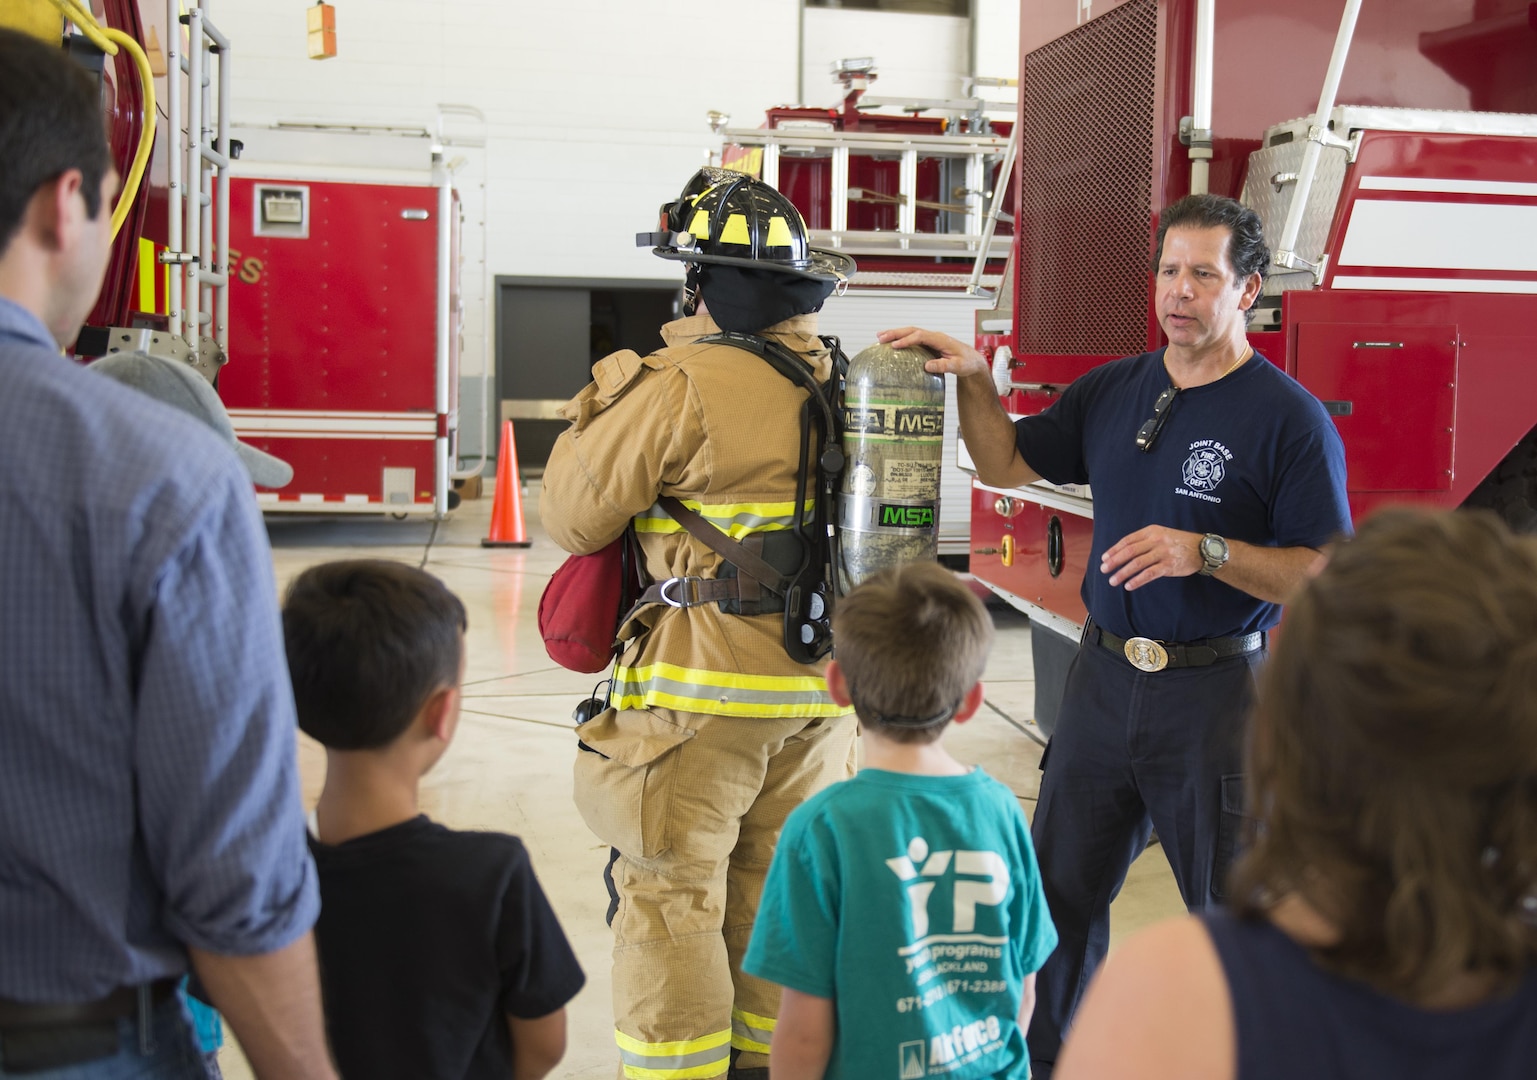 Jeffery Pardo (left), 502nd Civil Engineering Squadron firefighter, wears his fire protection gear as Michael Martinez, 502nd CES firefighter, talks about the different equipment to children from Vibrant ABA Solutions during a open house tour of Fire Station 2 June 23, 2017, at Joint Base San Antonio-Lackland, Texas. One of the goals of hosting tour is to make children more comfortable with firefighters wearing their full gear so they won’t be frightened during an emergency. (U.S. Air Force photo by Senior Airman Krystal Wright)